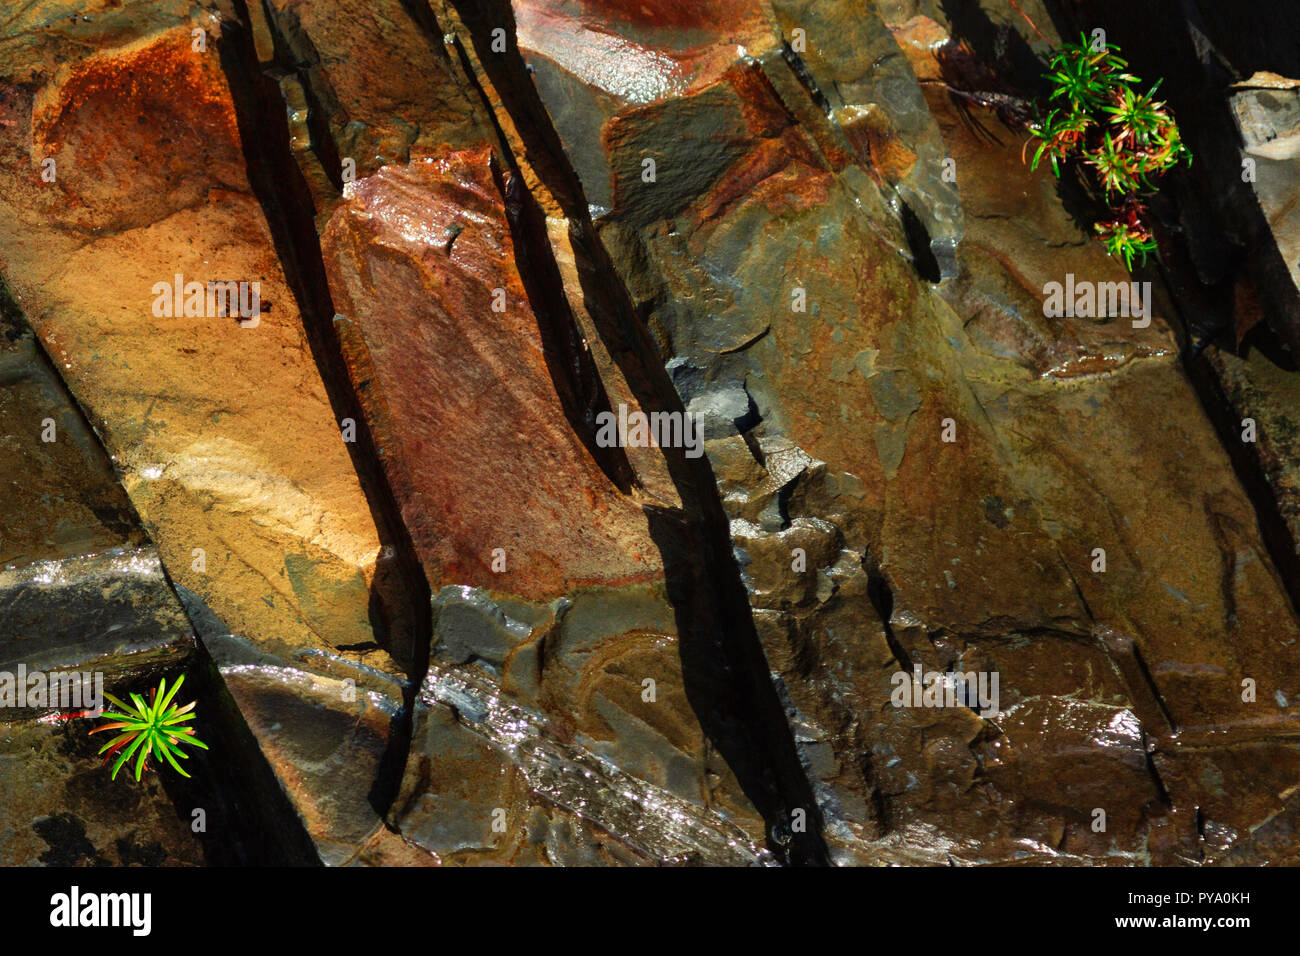 A close up image of seaside rock formations and flora taken in Spanish Point, Co. Clare, Ireland Stock Photo